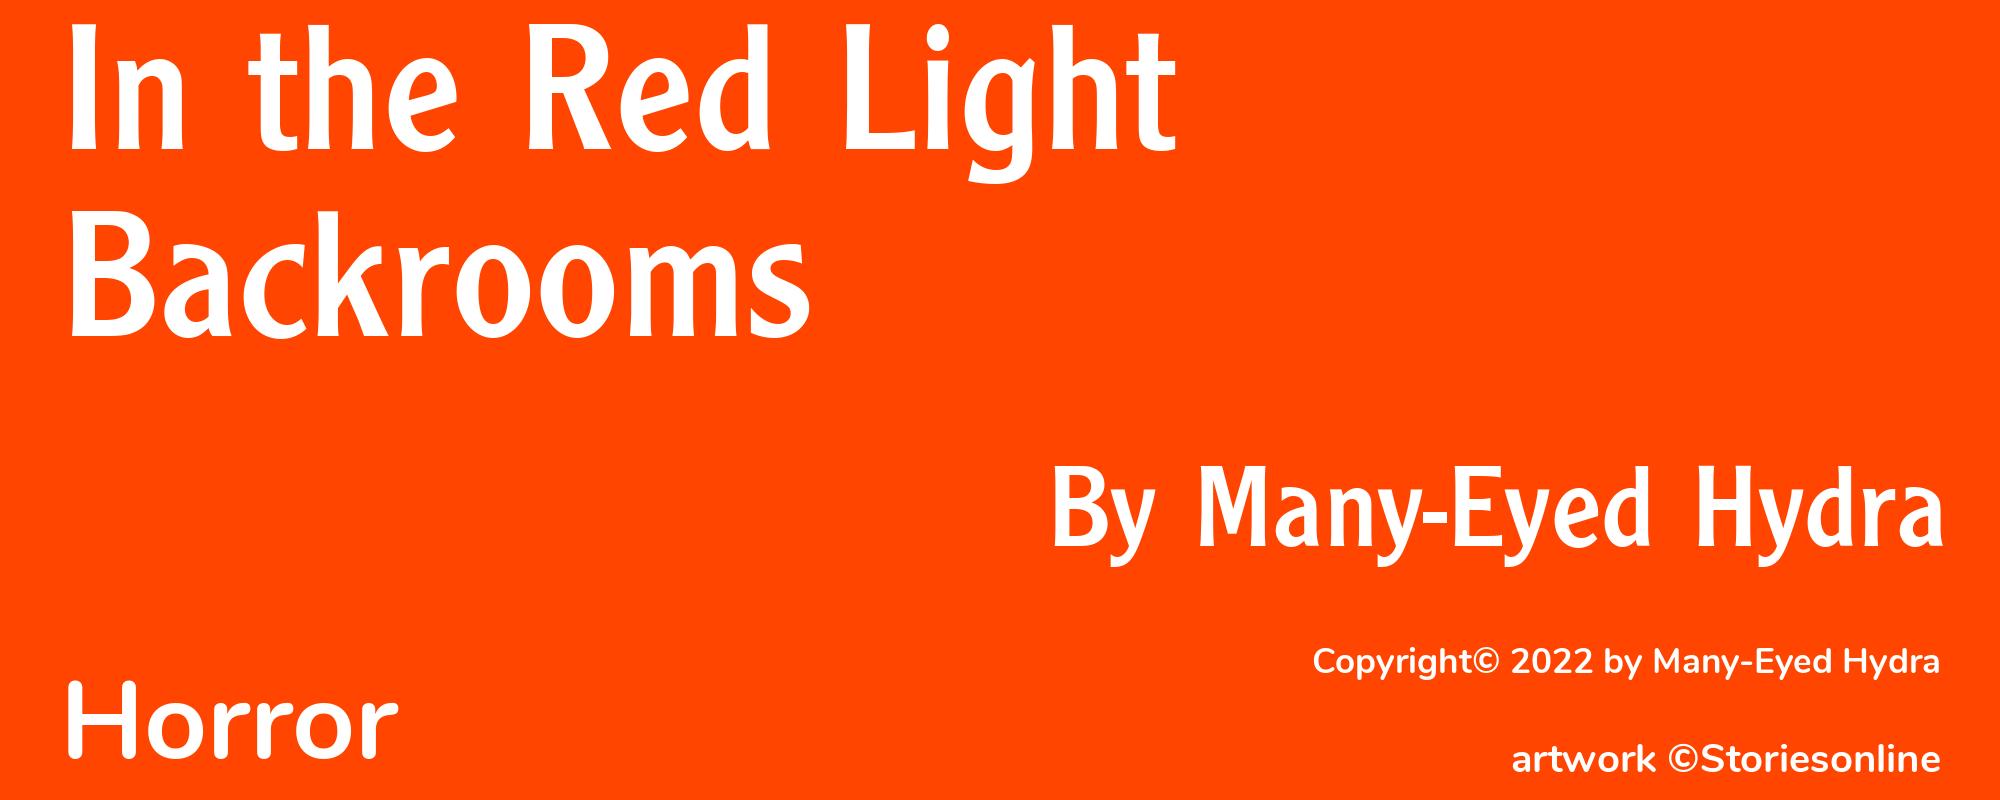 In the Red Light Backrooms - Cover